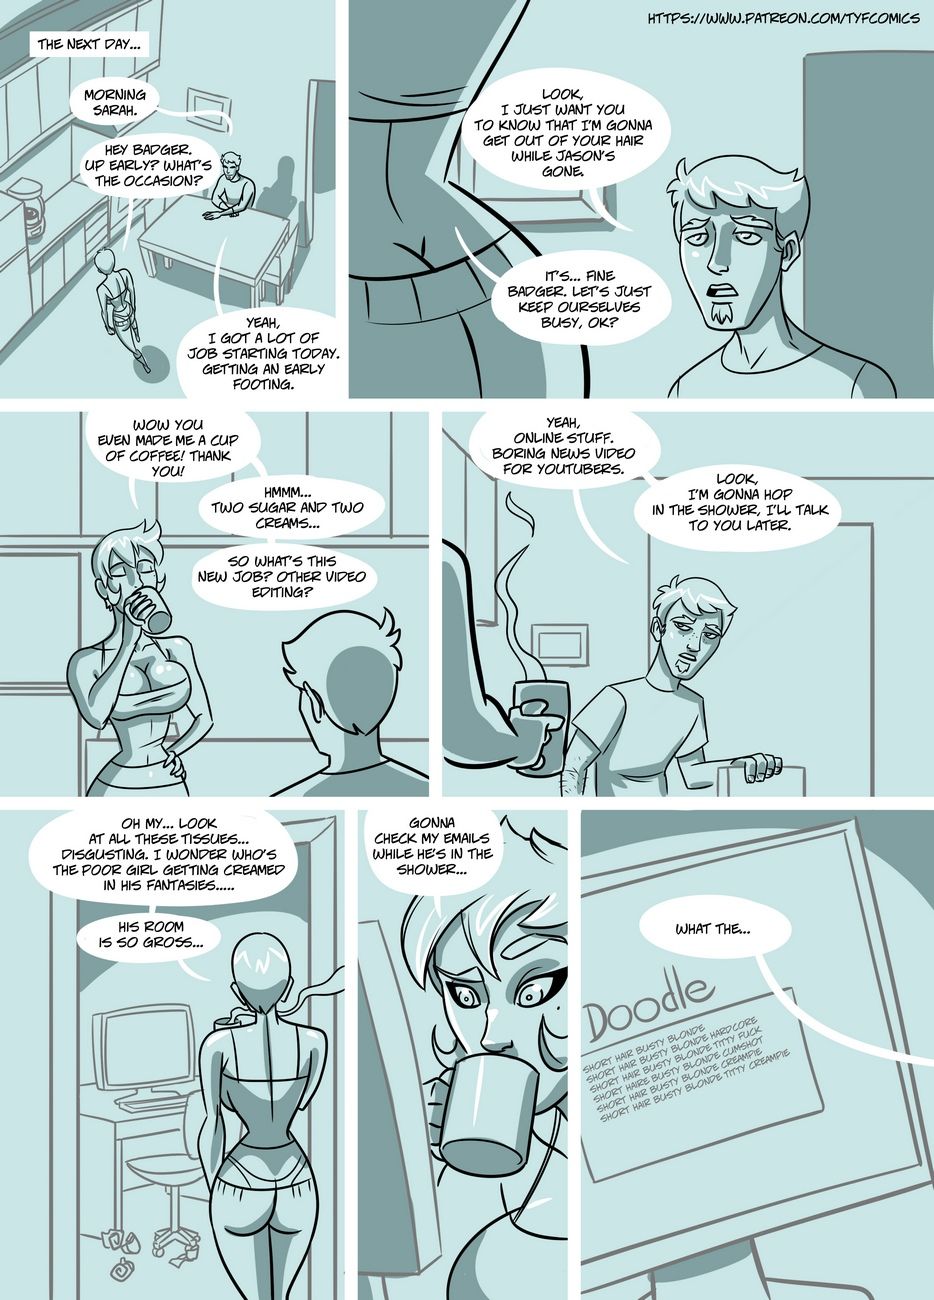 The Roommate - part 2 page 1